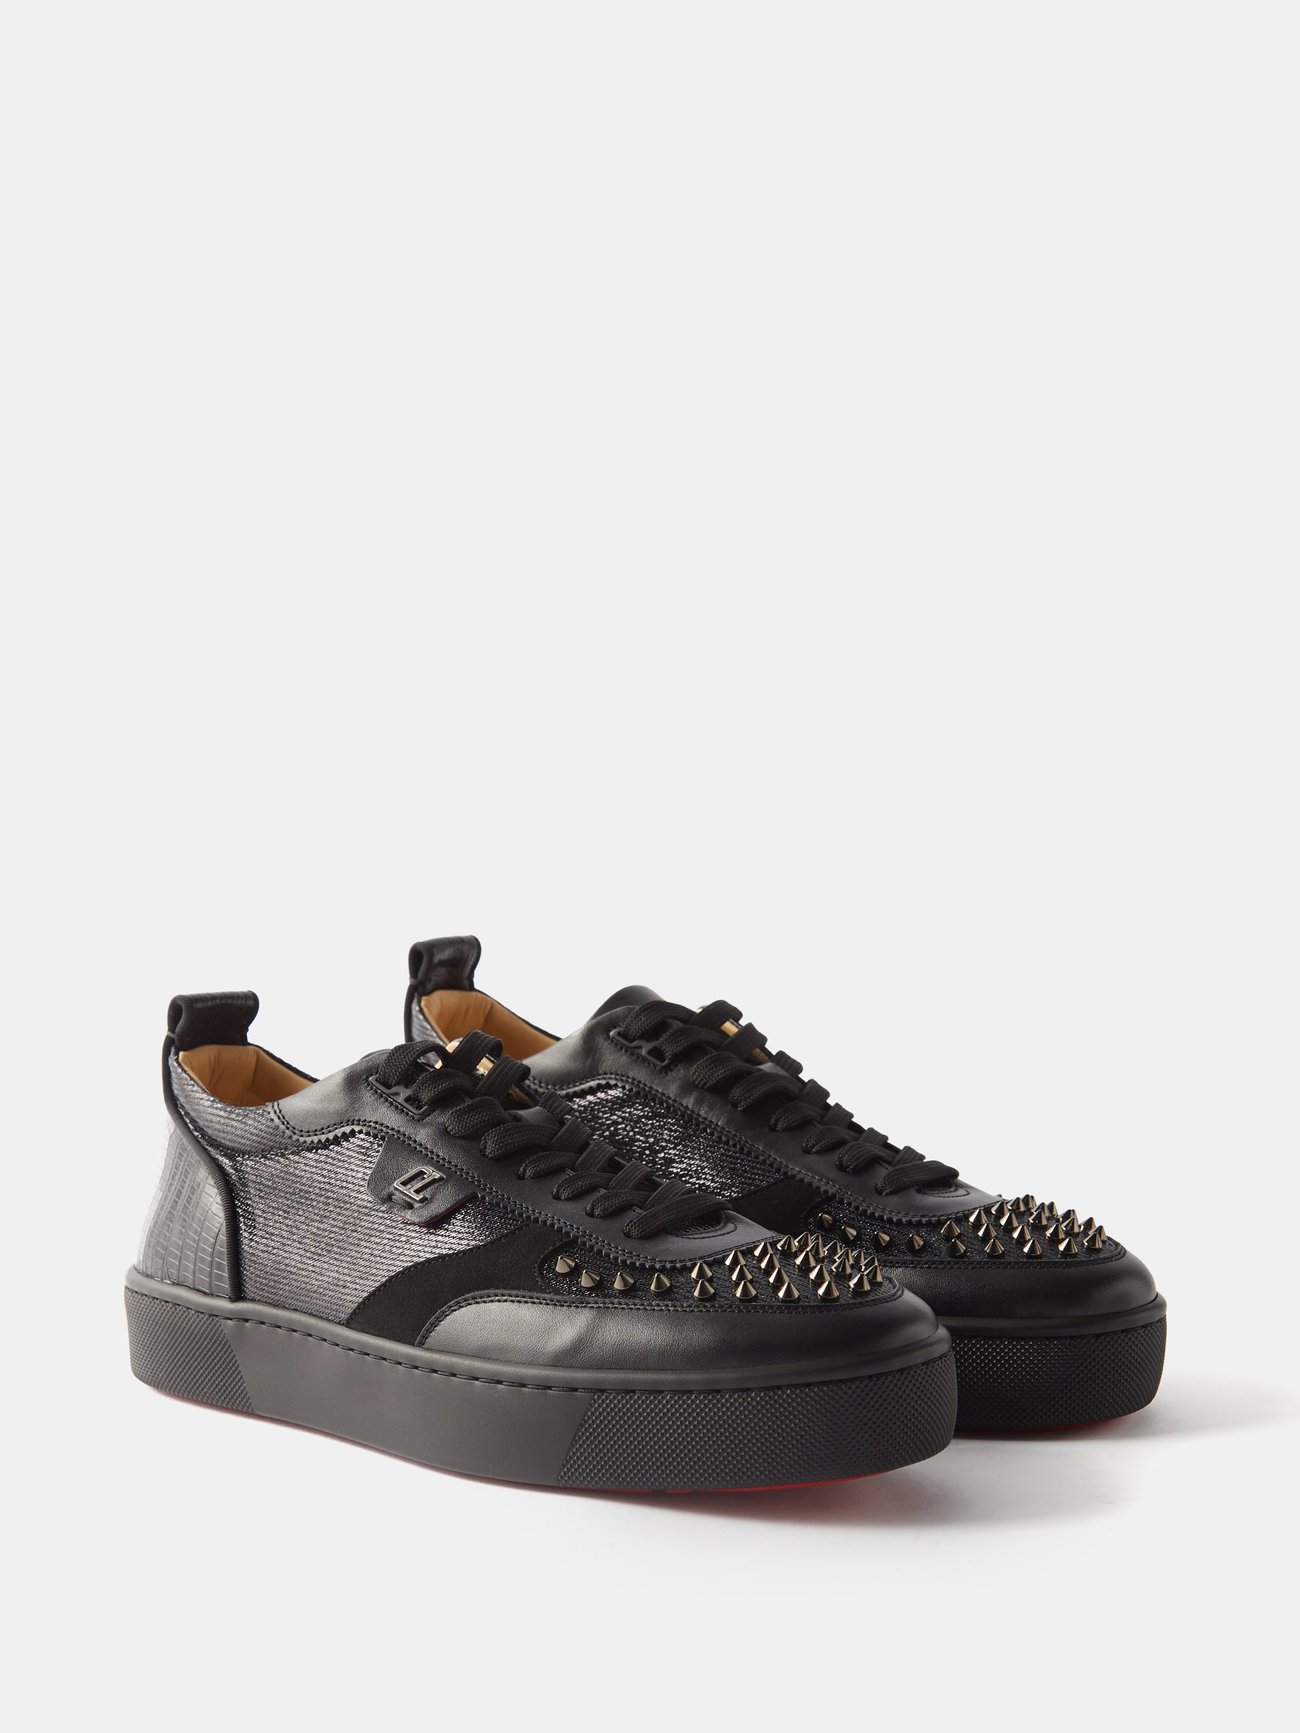 Happyrui Spiked Leather Sneakers